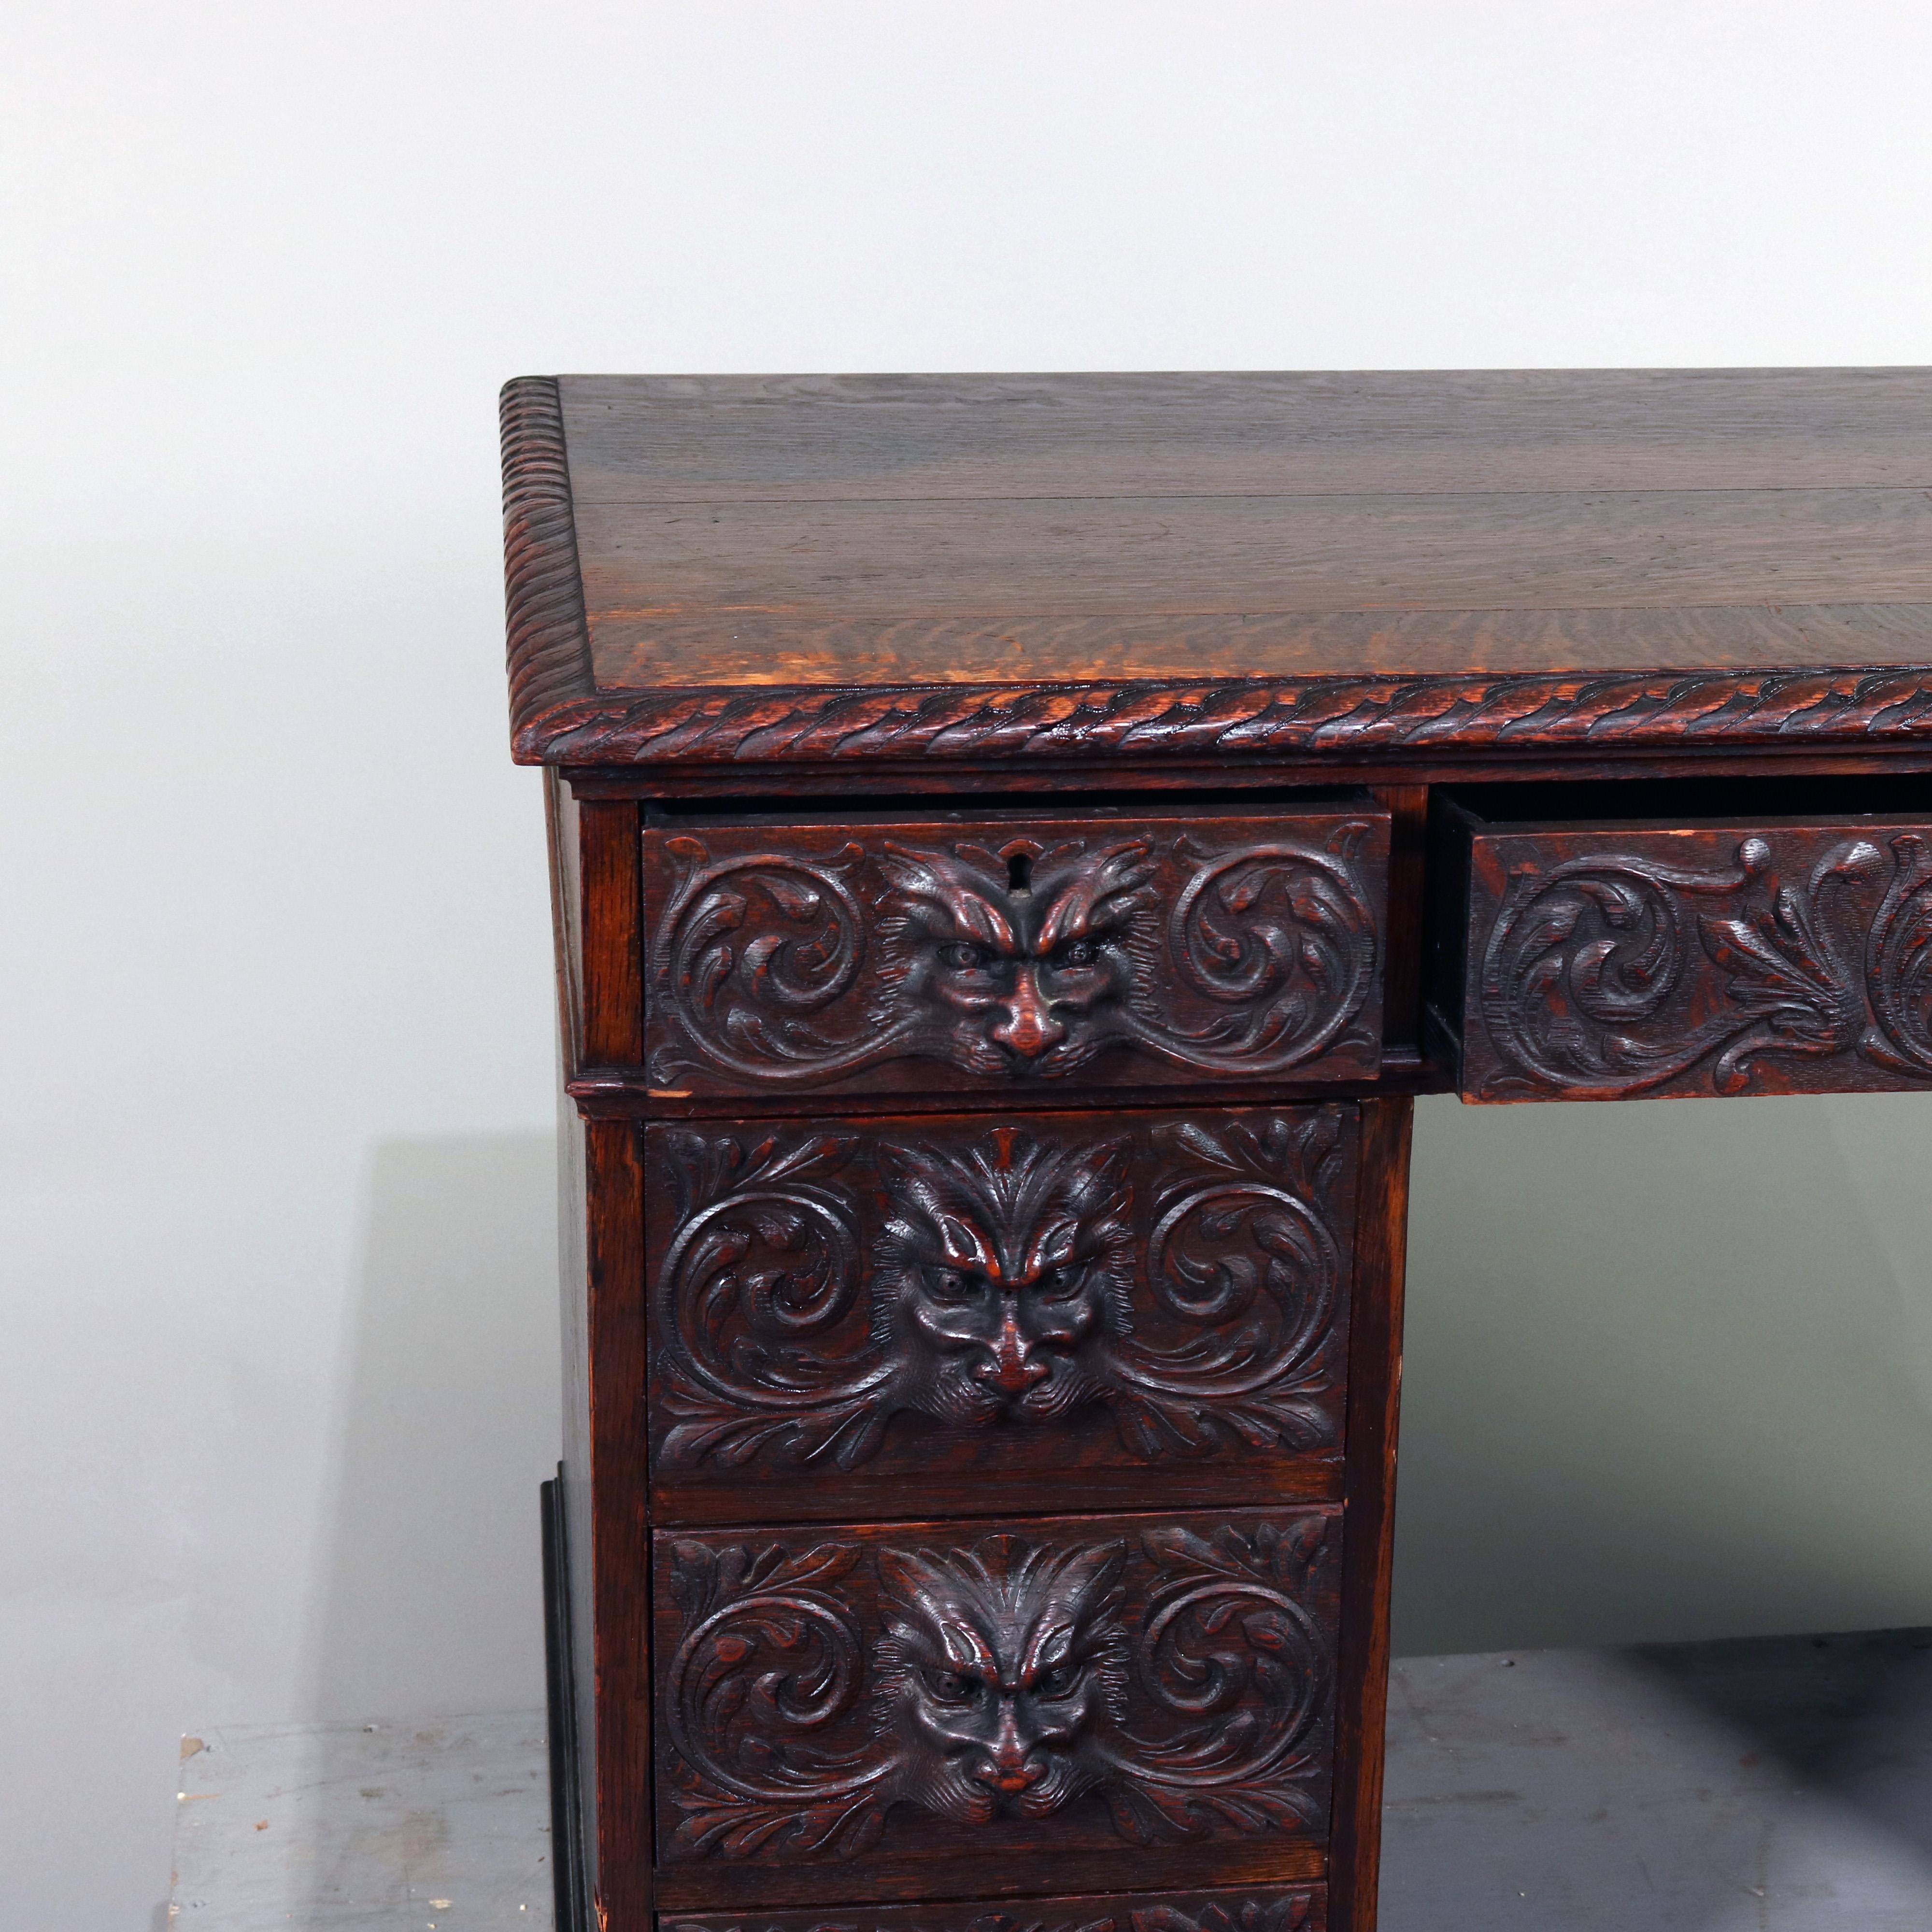 Antique R.J. Horner School knee hole campaign desk features deeply carved oak construction with rope twist top surmounting central drawer with flanking drawer columns, each deeply carved with mask and foliate decoration, reminiscent of Black Forest,